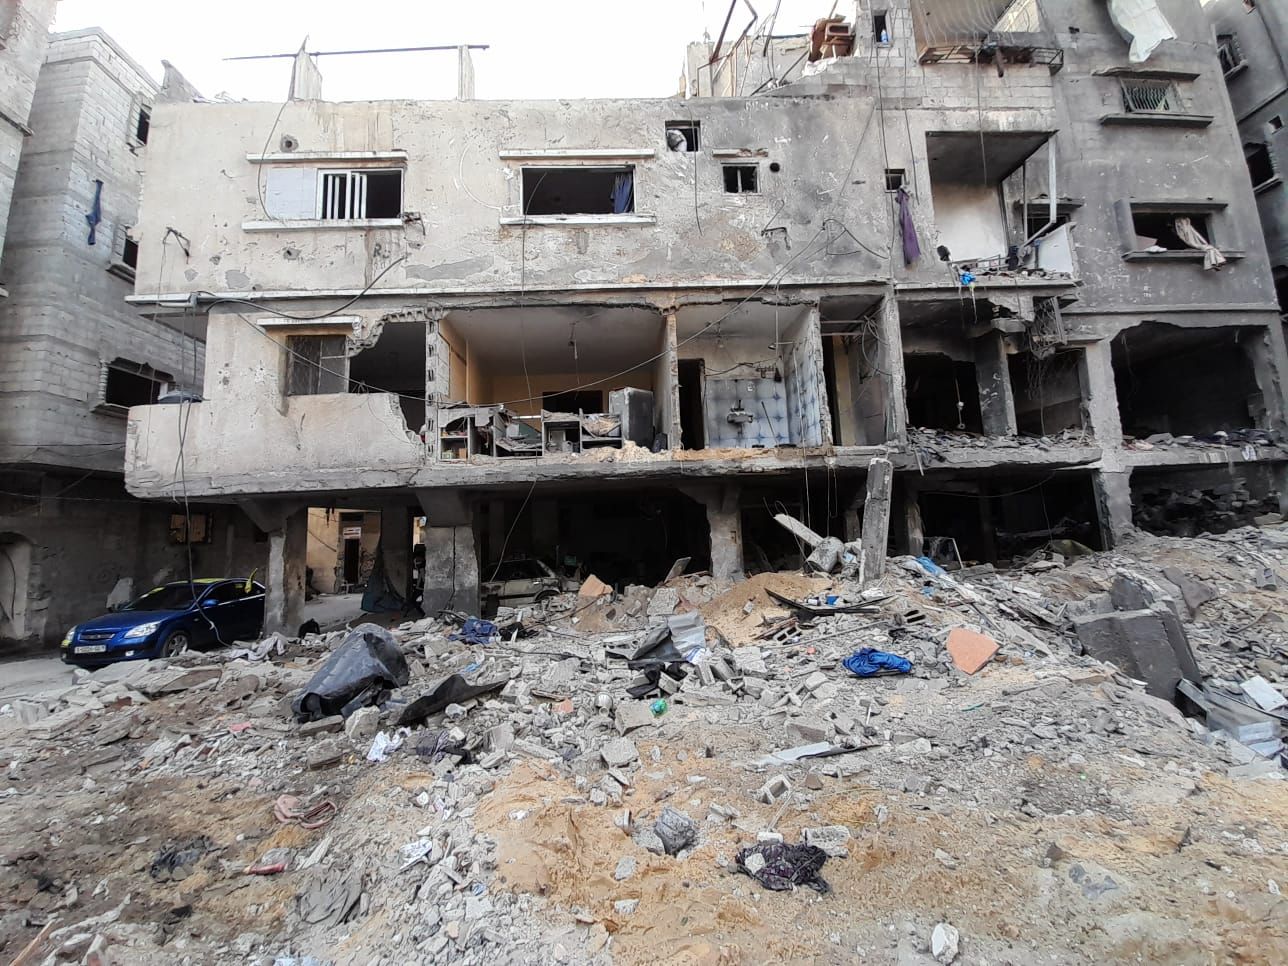 Damage caused to the Abu Mu’eileq family home in Gaza by US-made munitions